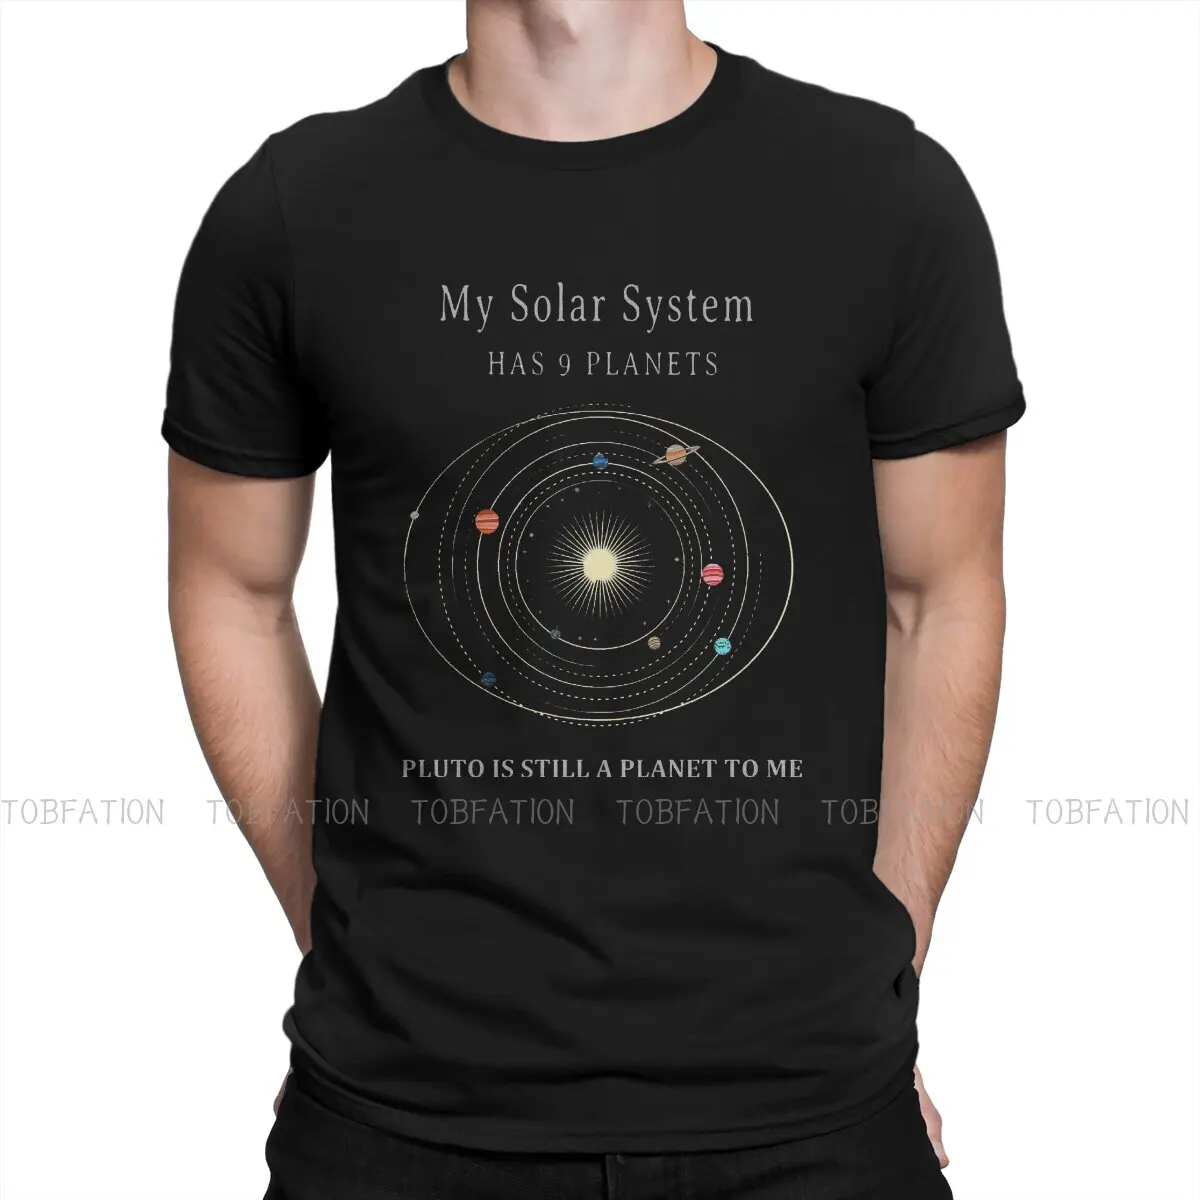 

My Solar System Has 9 Planets Hipster TShirts Many Lands Under One Sun Male Harajuku Pure T Shirt Round Neck Big Size